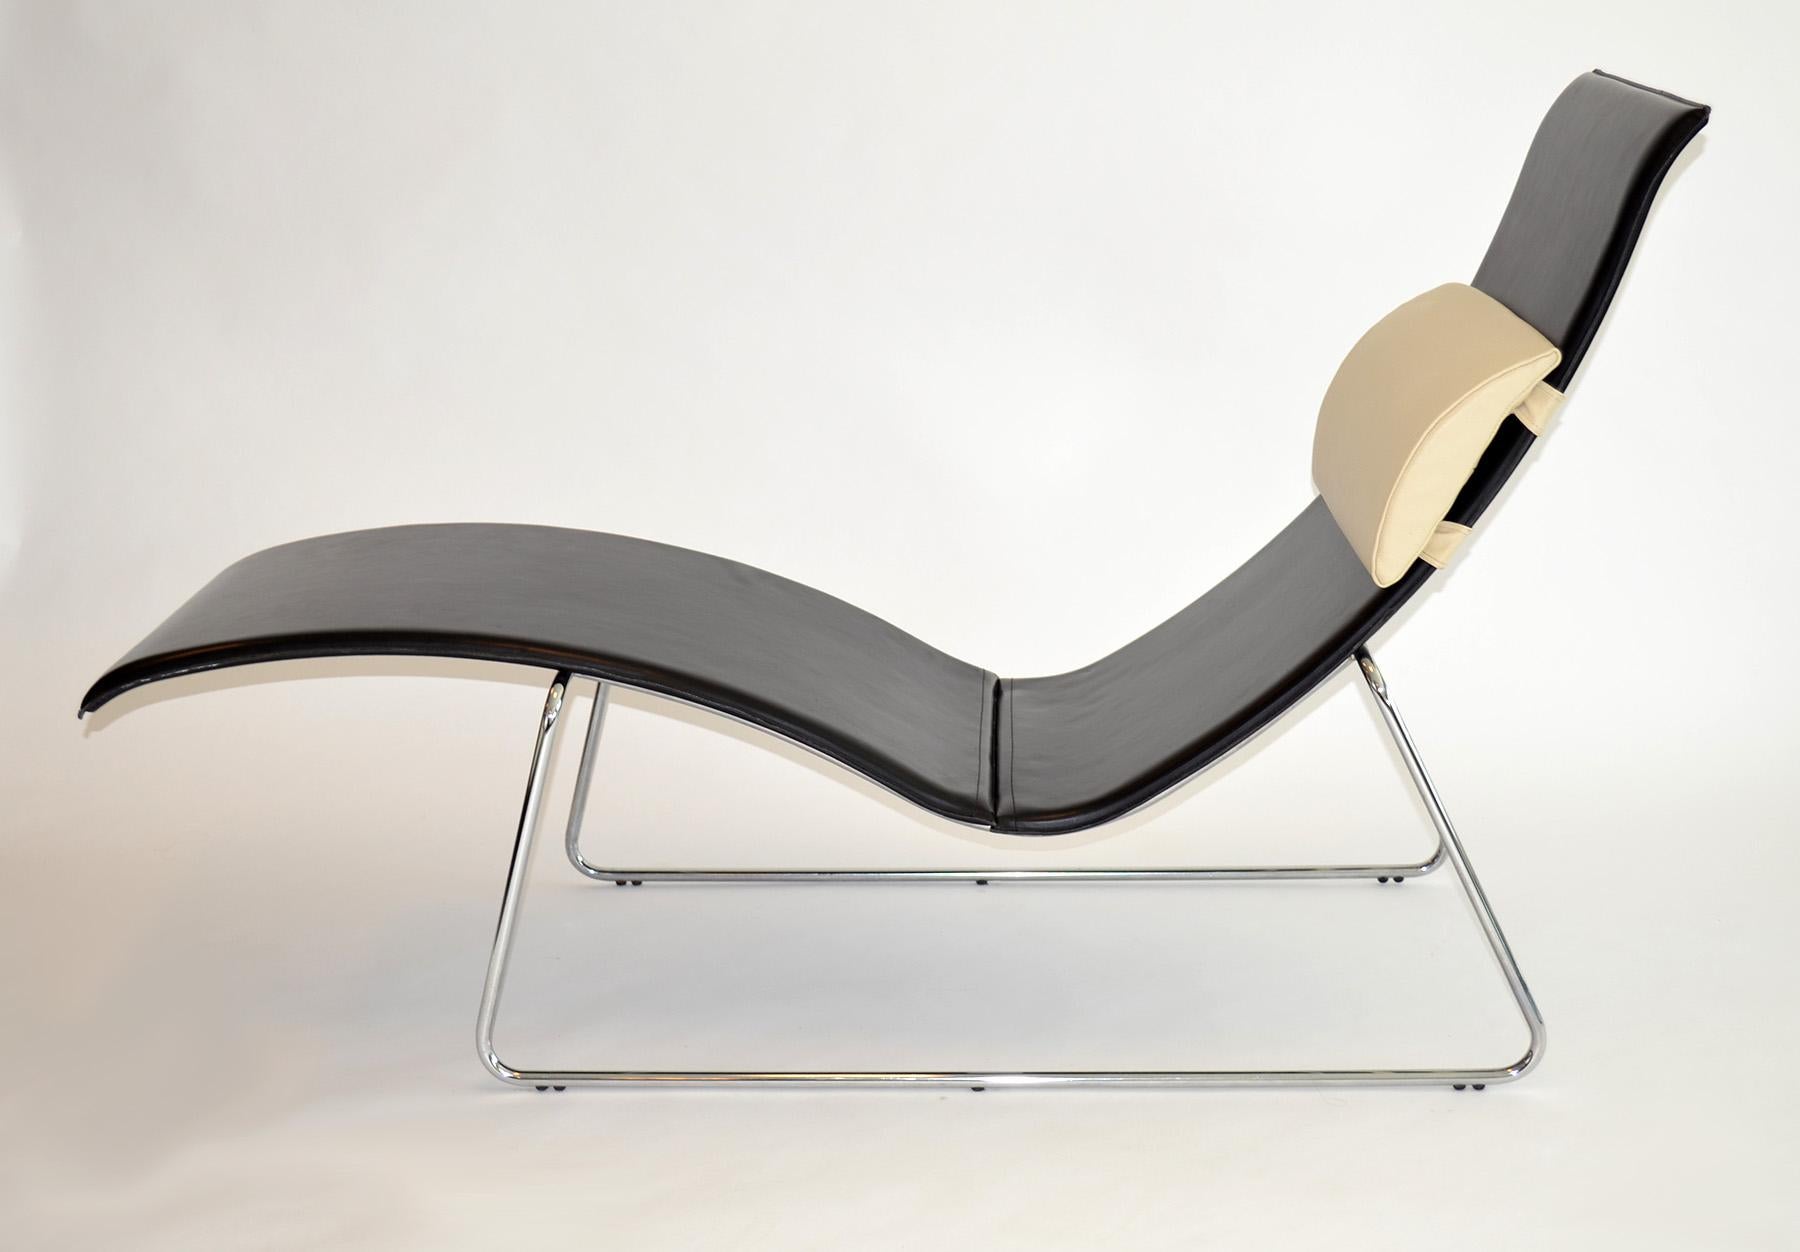 Chaise longue or lounge chair in full grain leather on steel base 1990's Italy
Thin-profile and sleek with quality-stitched thick black leather longue recumbent on a minimalist steel base with an off-white pillow. Likely leather over foam-covered